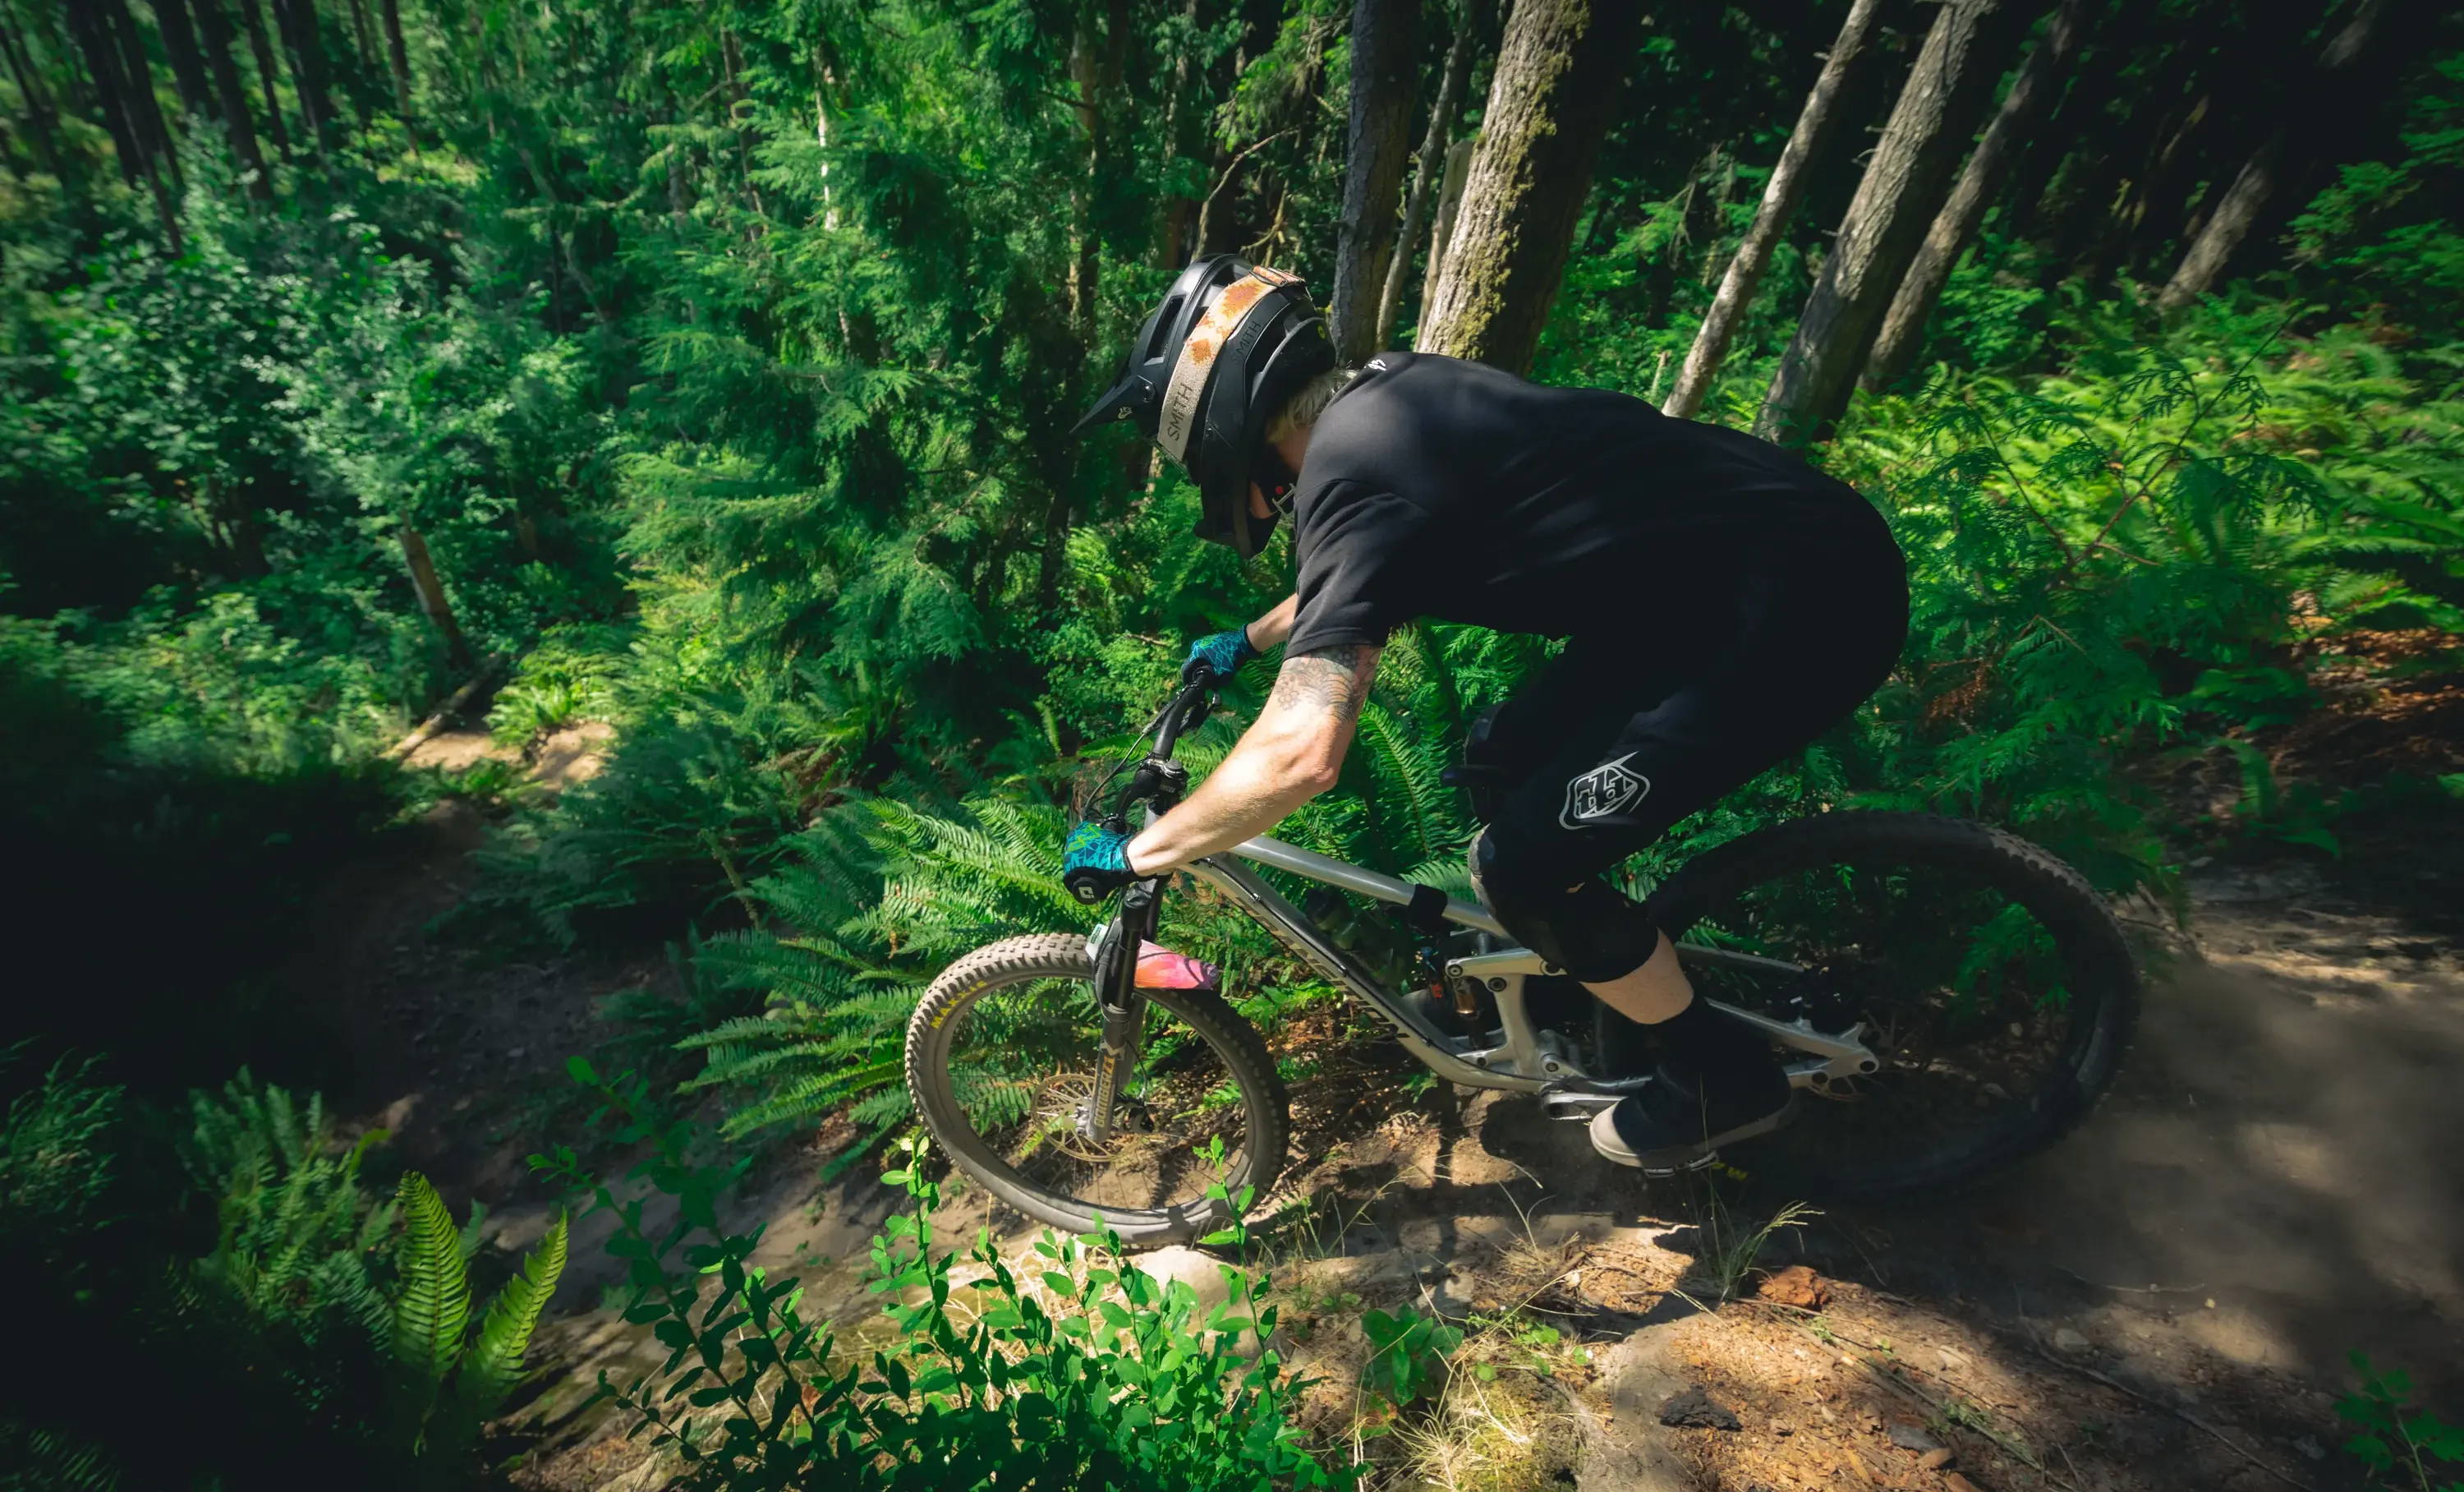 Riding steep MTB trail in PNW forest